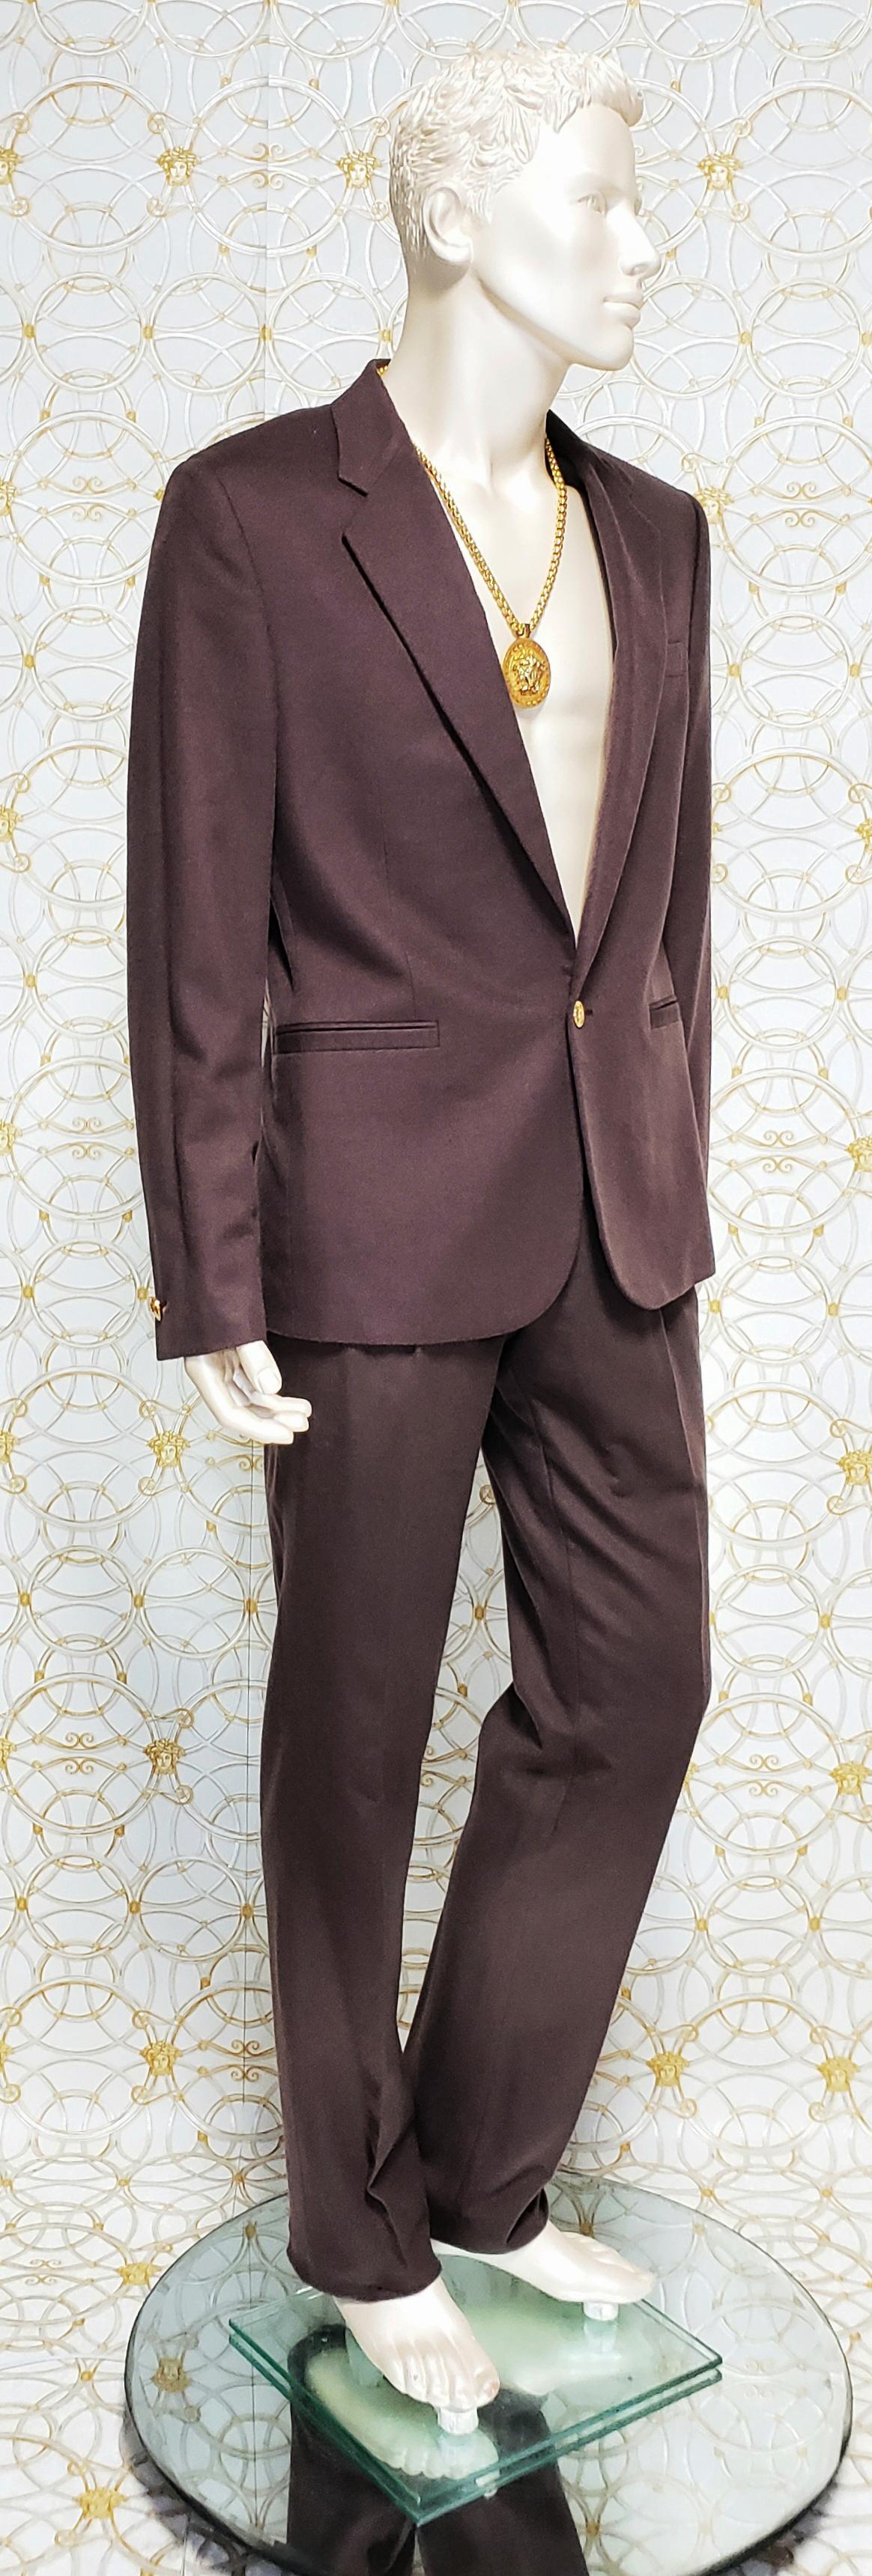 F/W 2015 look # 3 BRAND NEW VERSACE BROWN CASHMERE and SILK SUIT 50 - 40 (L) For Sale 1